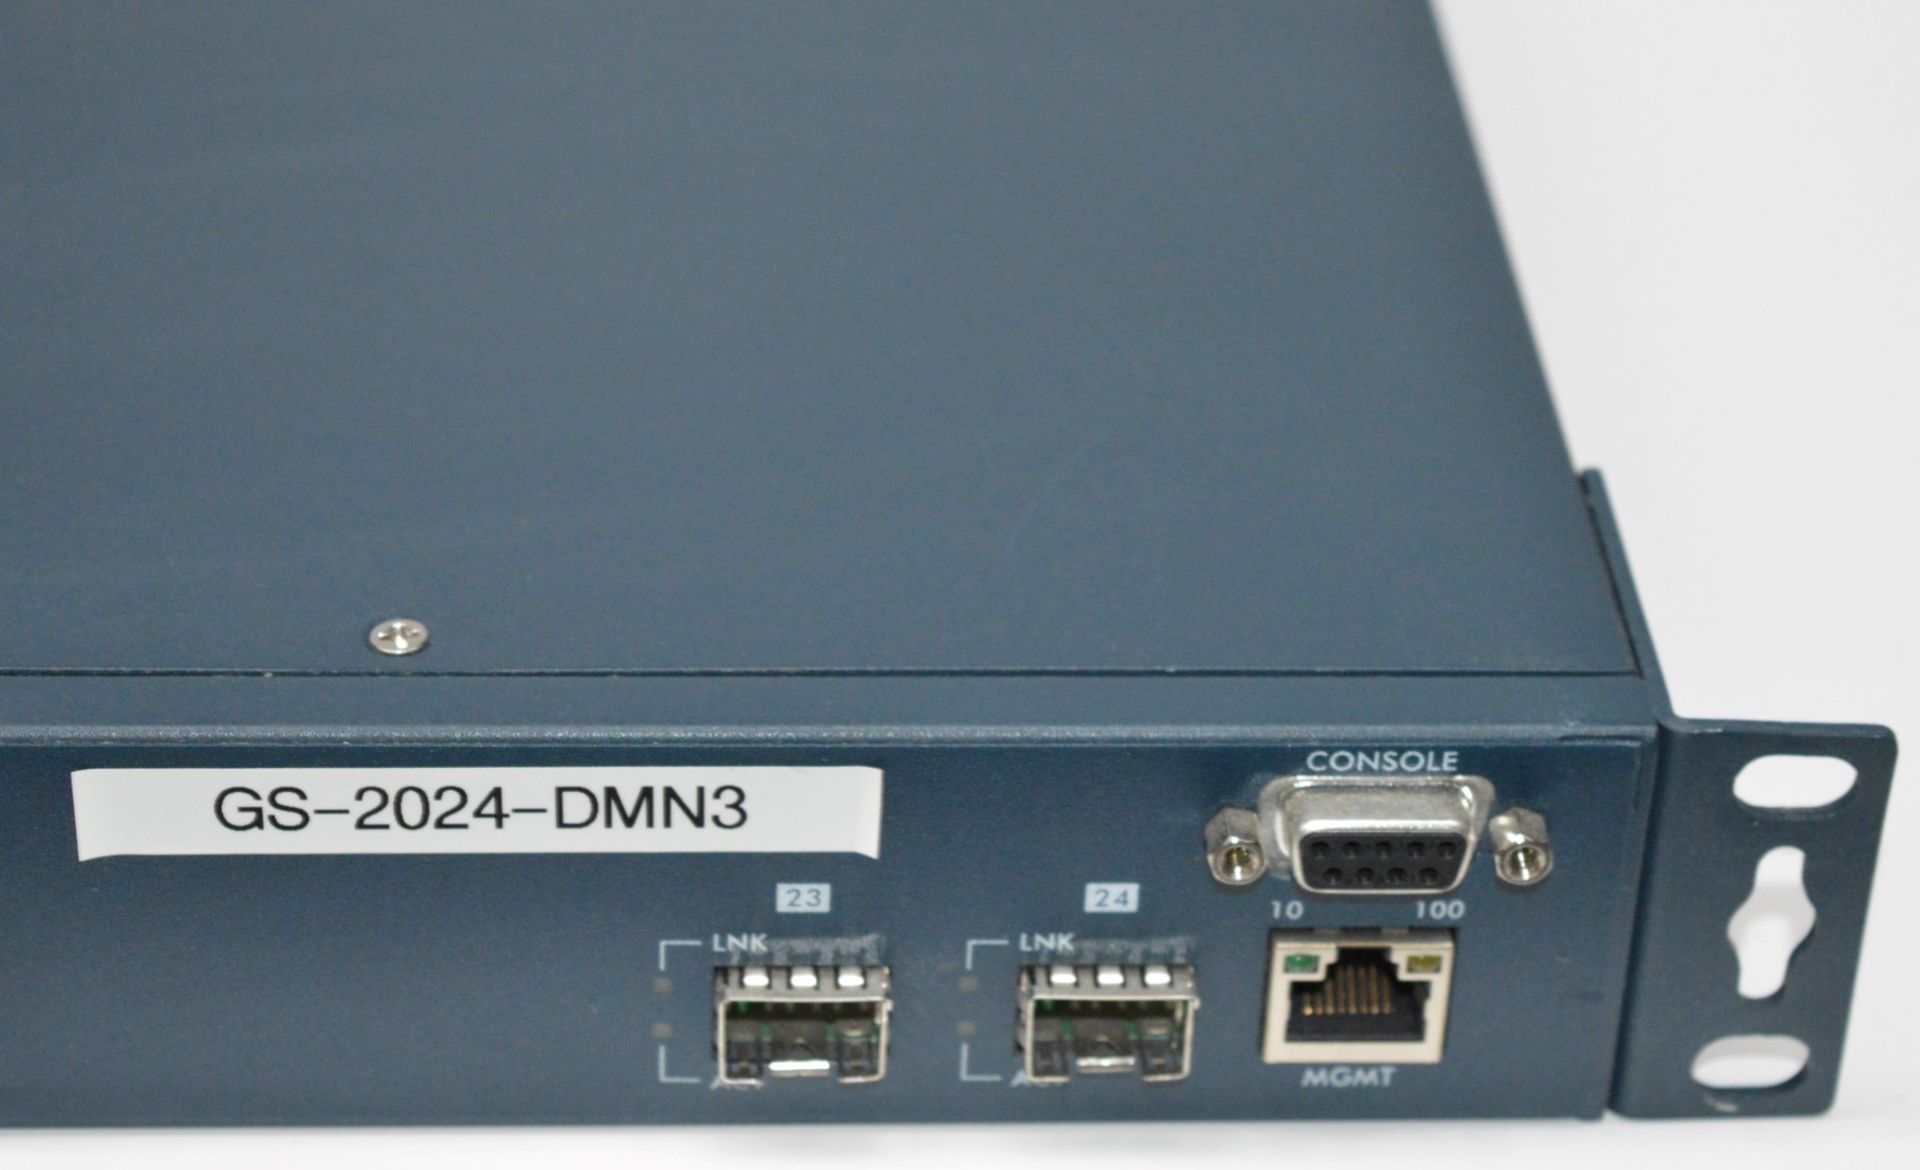 1 x Zyxel 24 Port Layer 2 Managed Gigibit Switch With Fiber Ports - Model GS-2024 - CL159 - Ref - Image 3 of 6